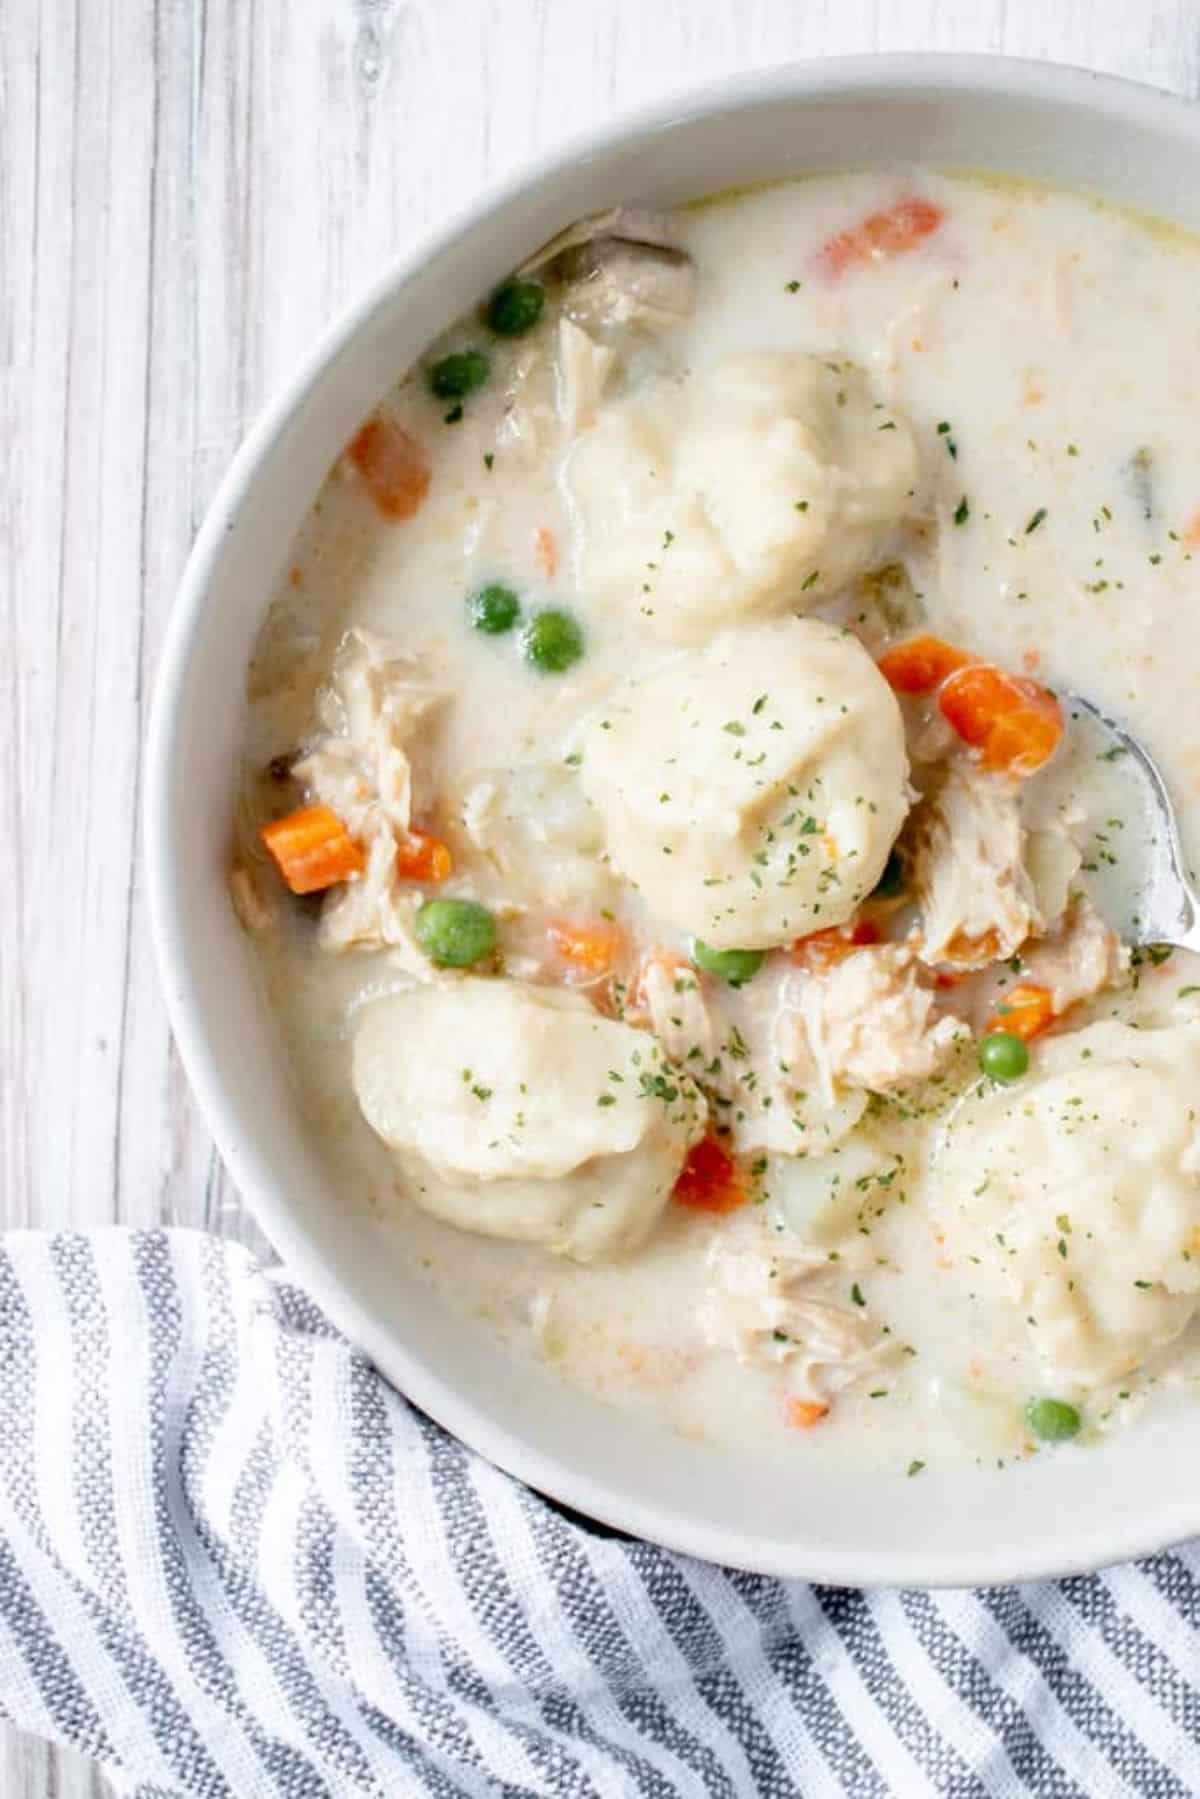 Delicious Gluten-Freee Chicken and Dumplings in a white bowl.